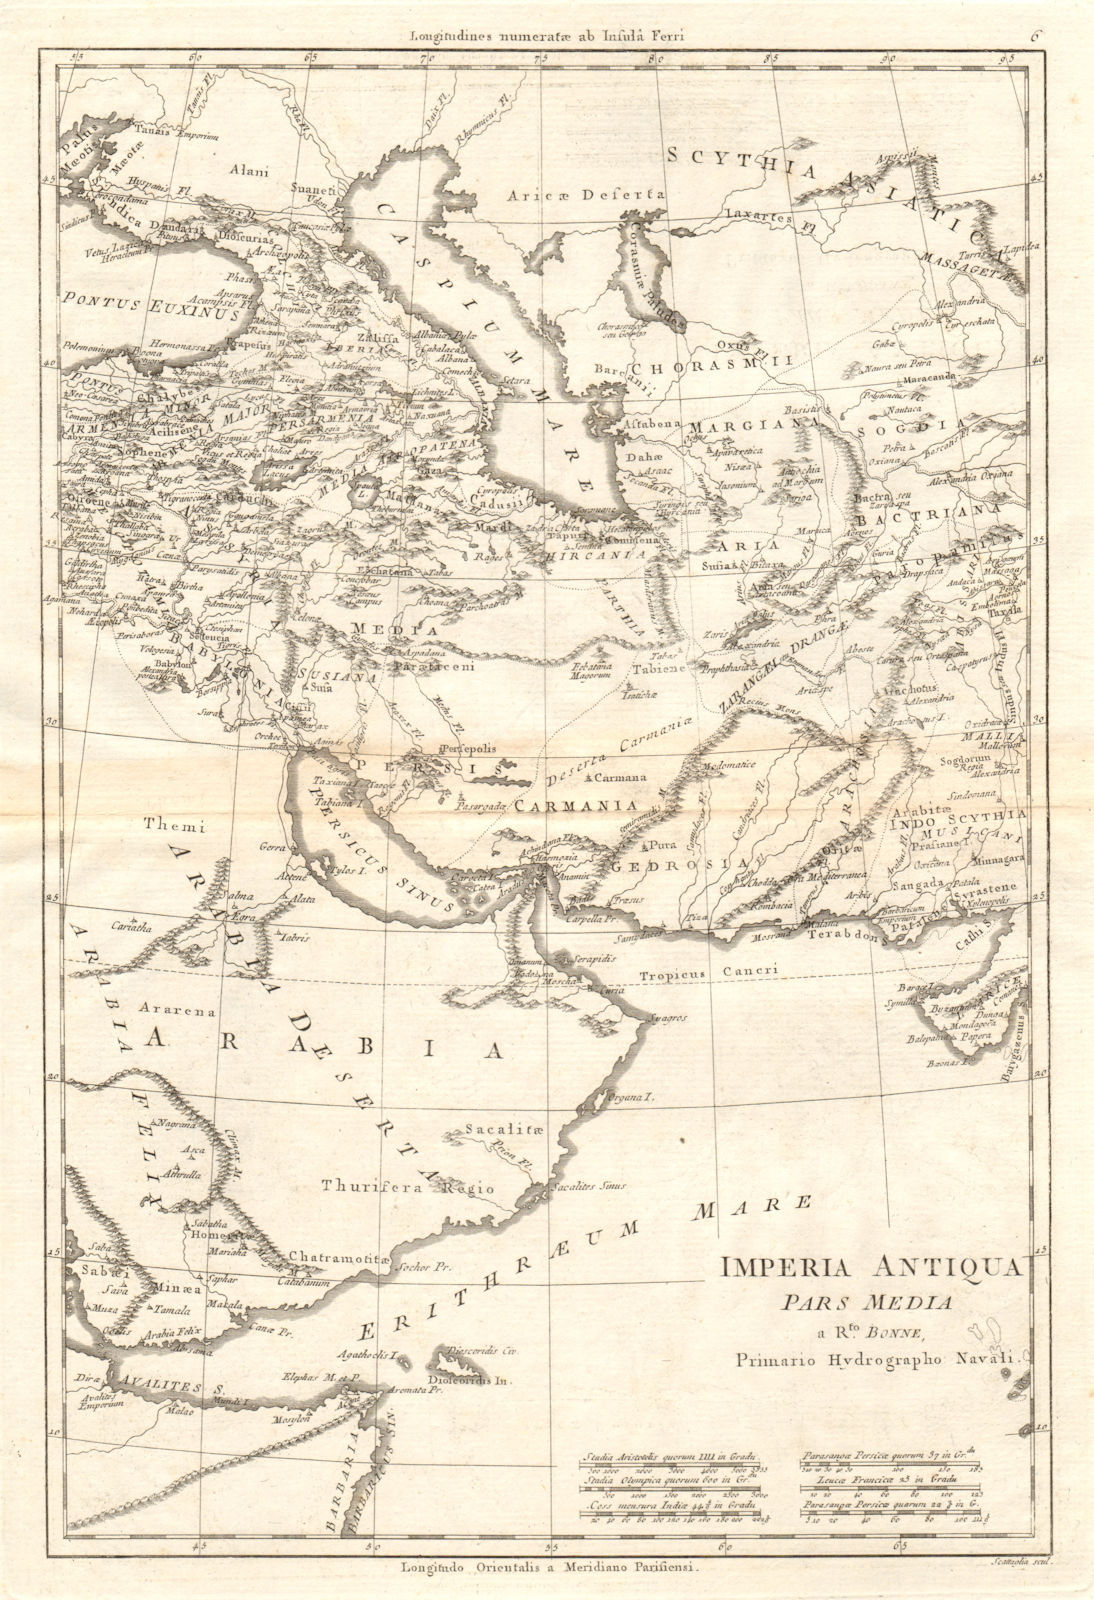 Imperia Antiqua, pars Media. Empire of Alexander the Great. BONNE 1789 old map